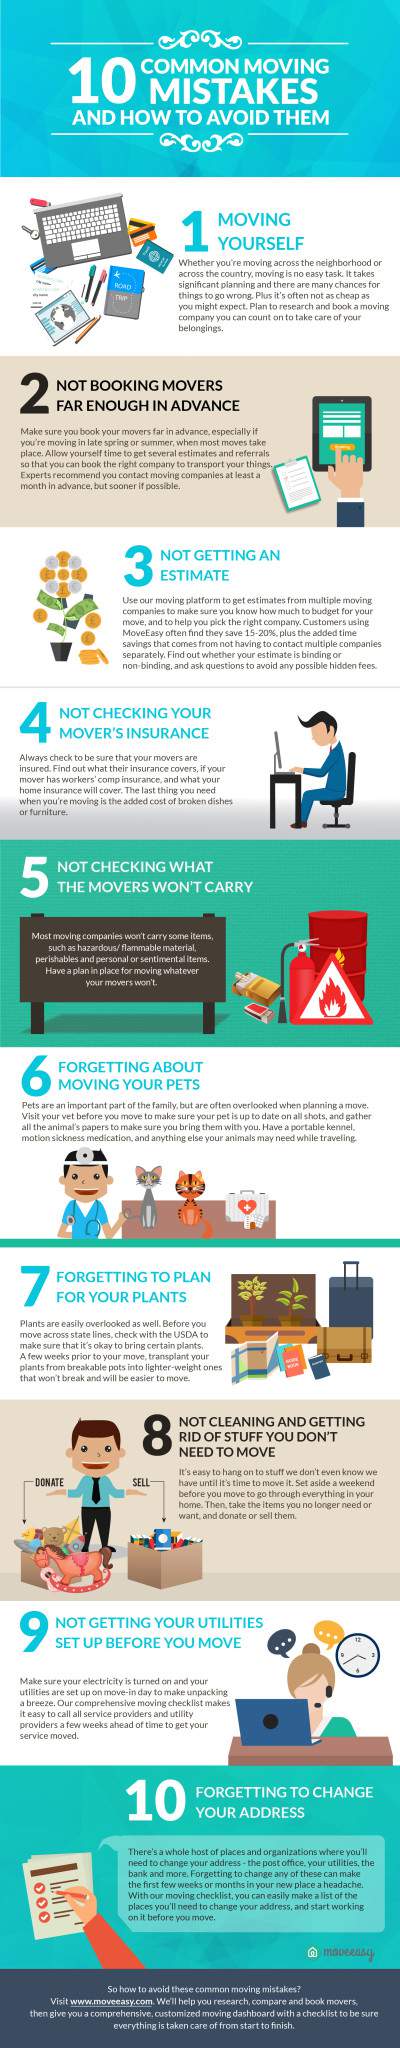 Common Moving Mistakes